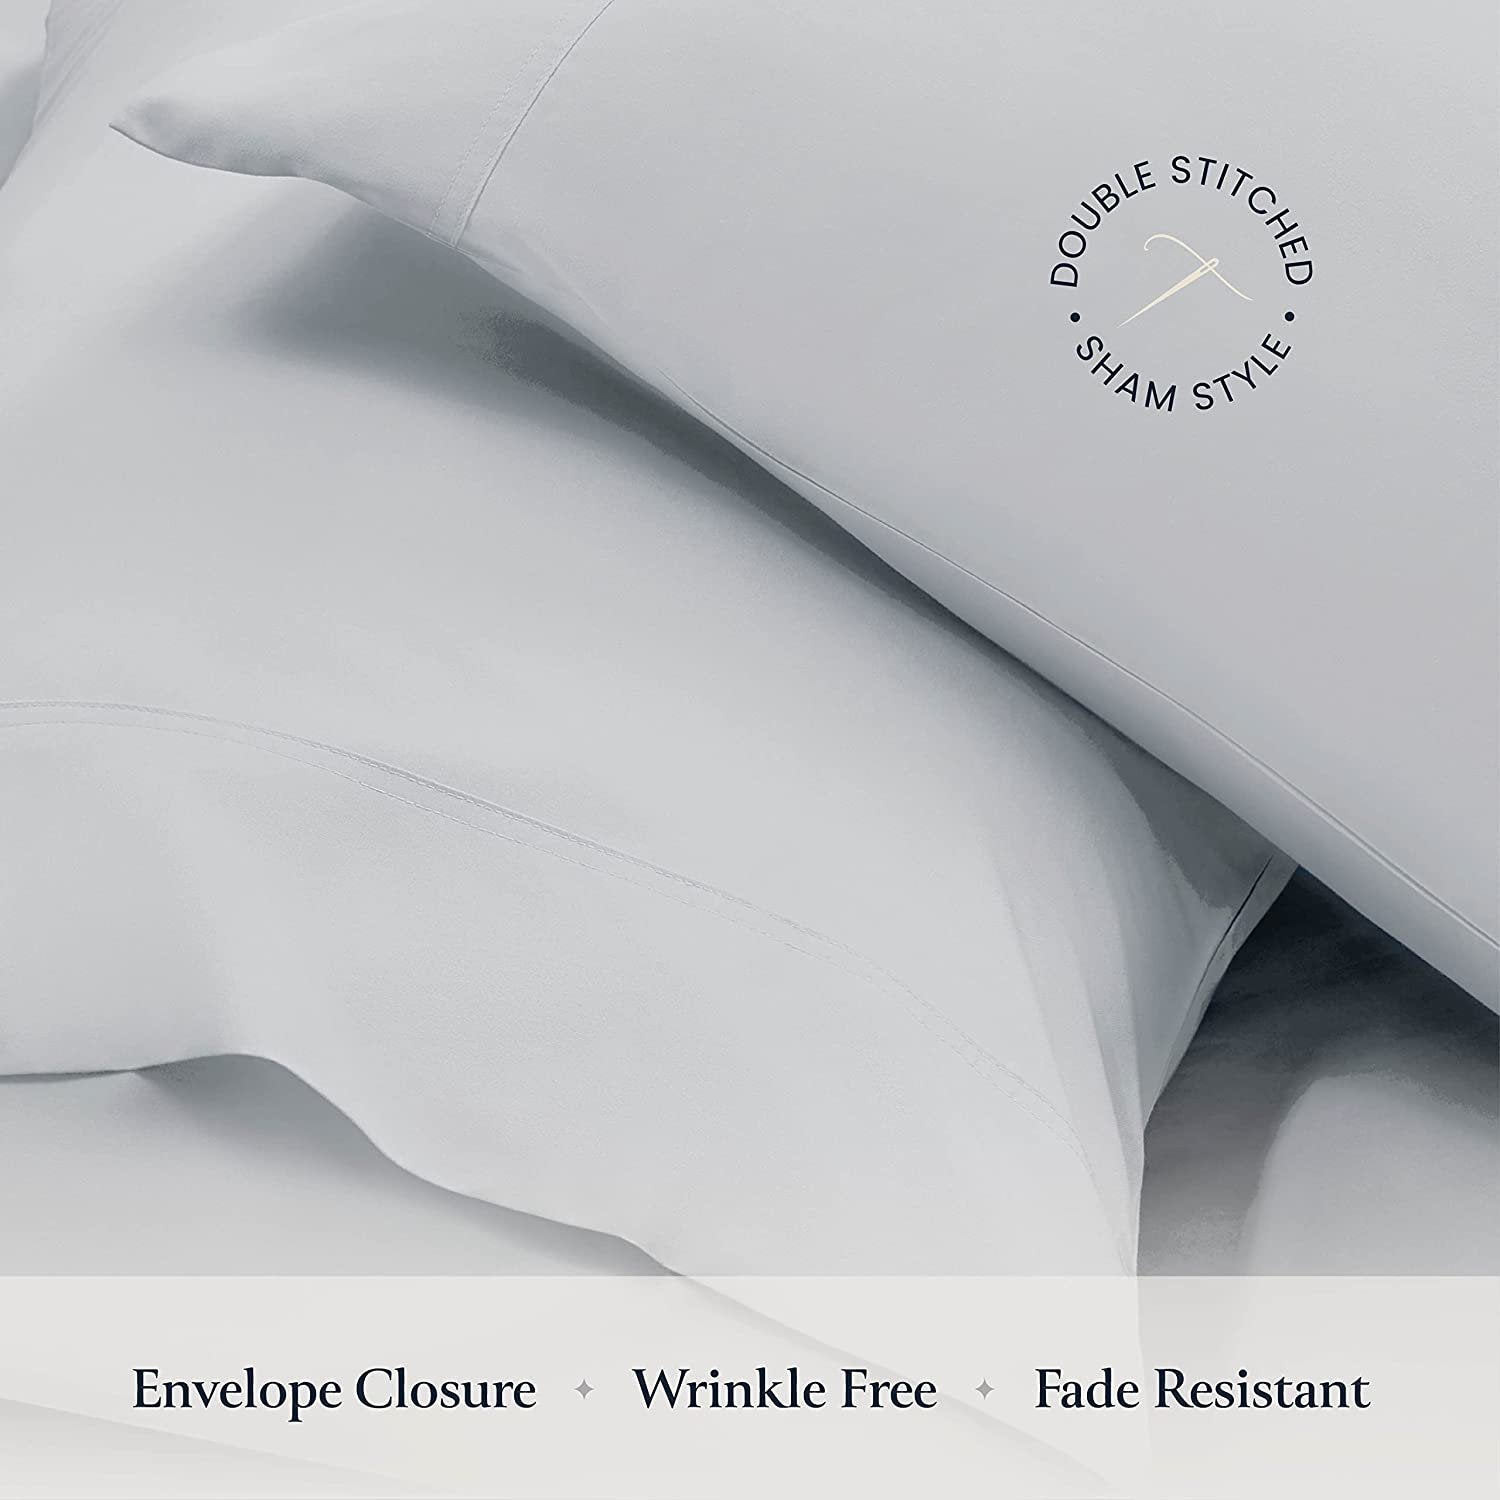 BELADOR Silky Soft King White Sheet Set -Luxury 6 Piece Bed Sheets for King Size Bed, Secure-Fit Deep Pocket Sheets with Elastic, Breathable Hotel Sheets & Pillowcase Set, Wrinkle Free Oeko-Tex Sheets